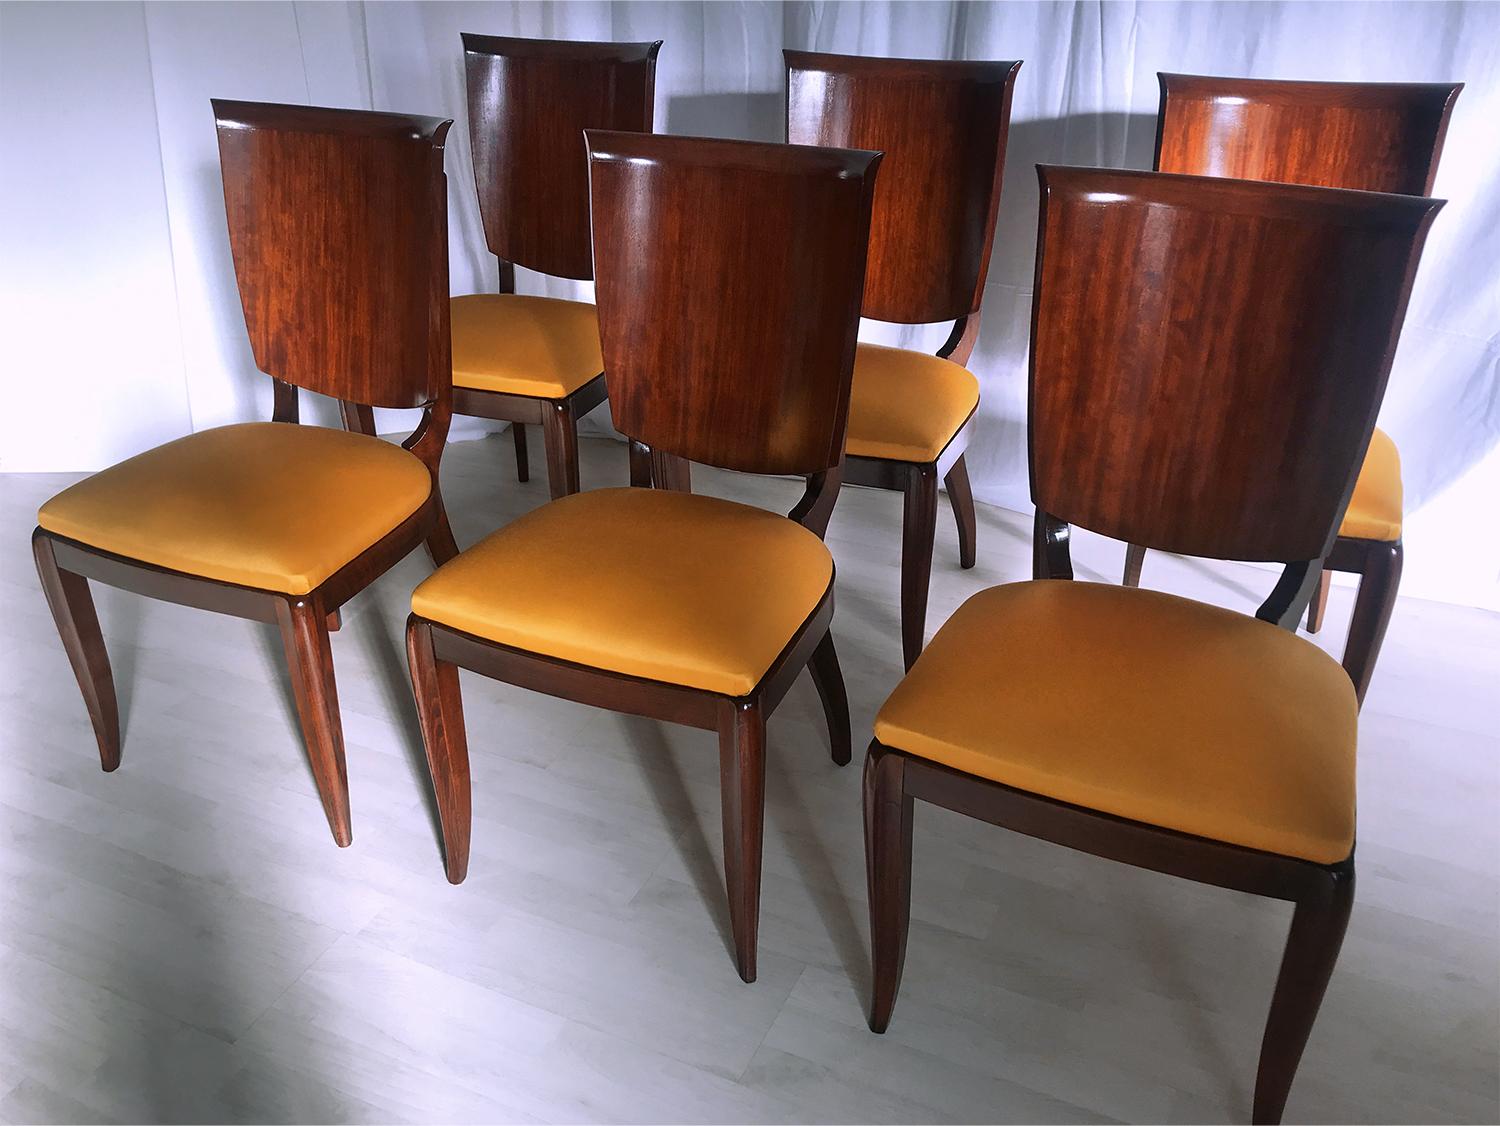 Italian Mid-Century Yellow Dining Chairs by Vittorio Dassi, Set of Six, 1950s For Sale 2